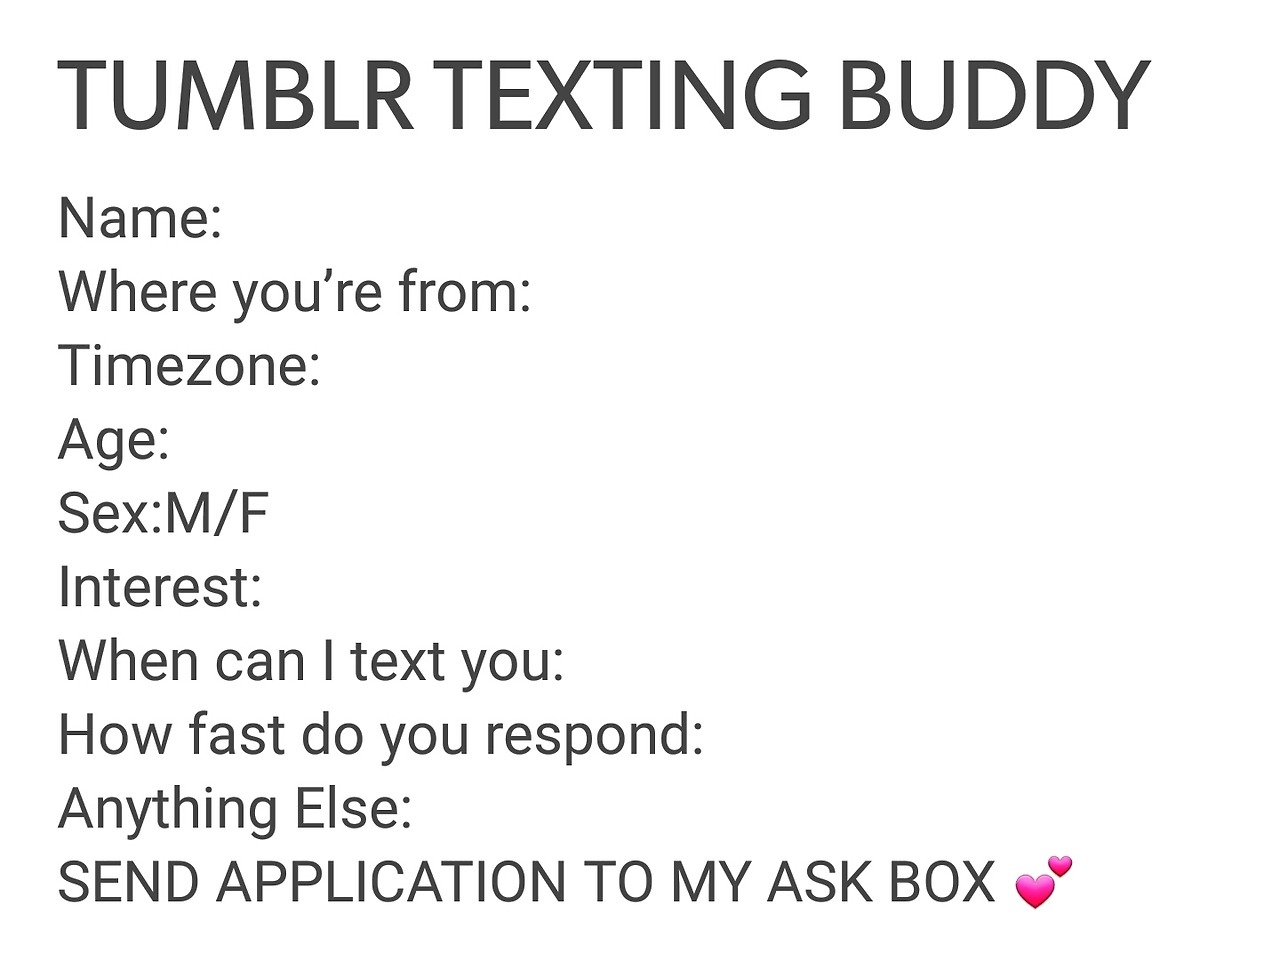 Buddy texting Lookin for